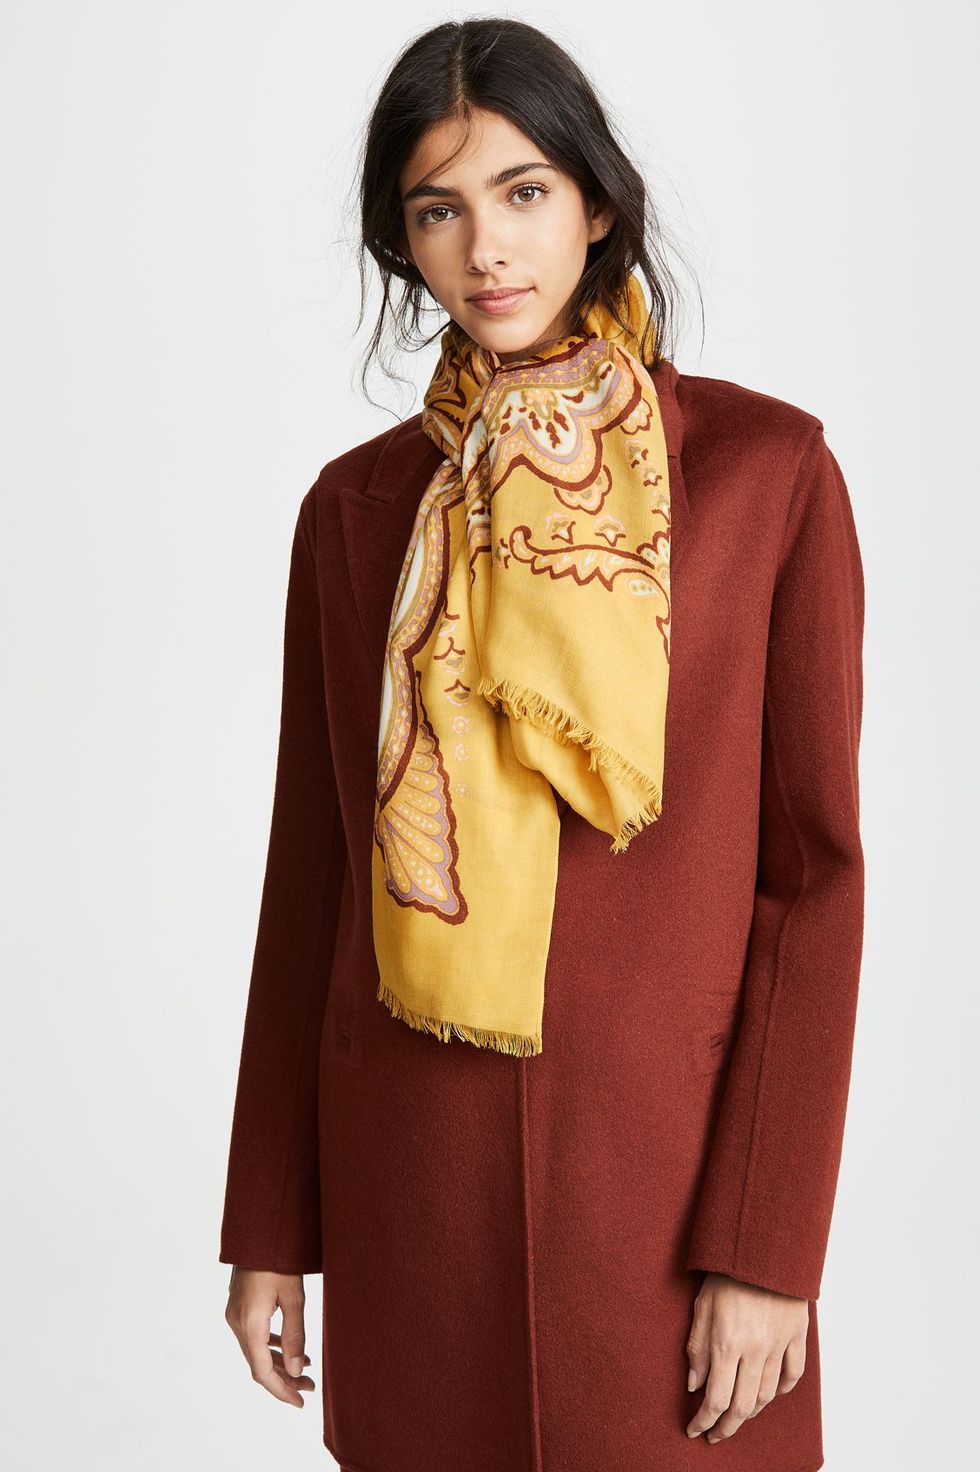 14 Best Fall Scarves - Oversized, Silk, and Plaid Scarves for Women